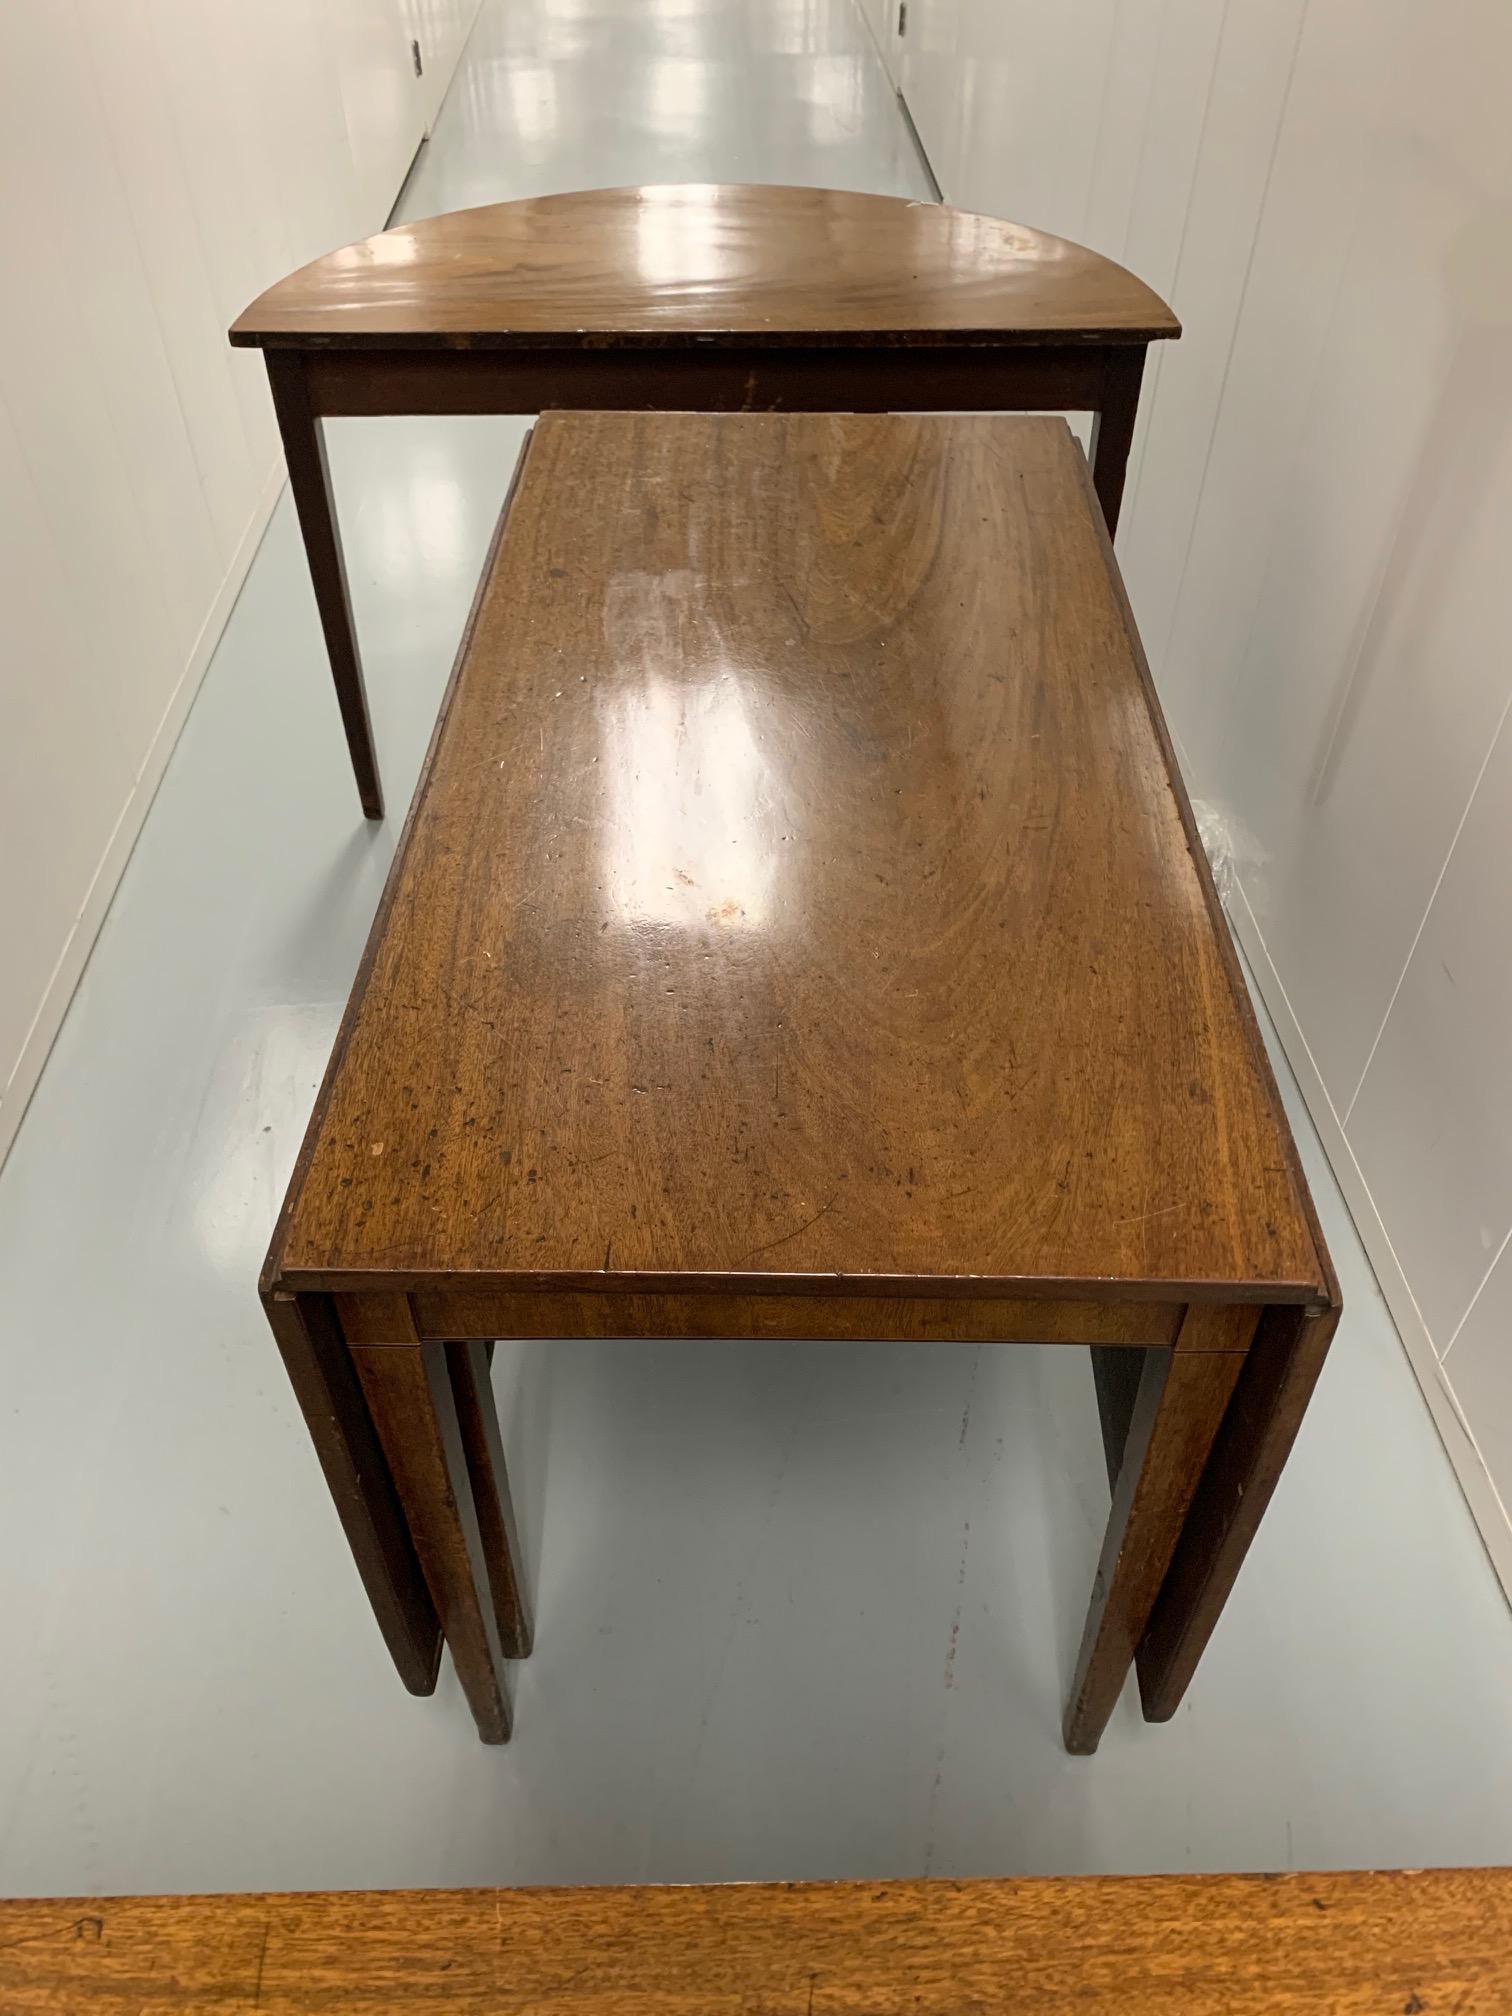 North American Rare 19th Century Hepplewhite Dining Table with Two Demilune Extensions